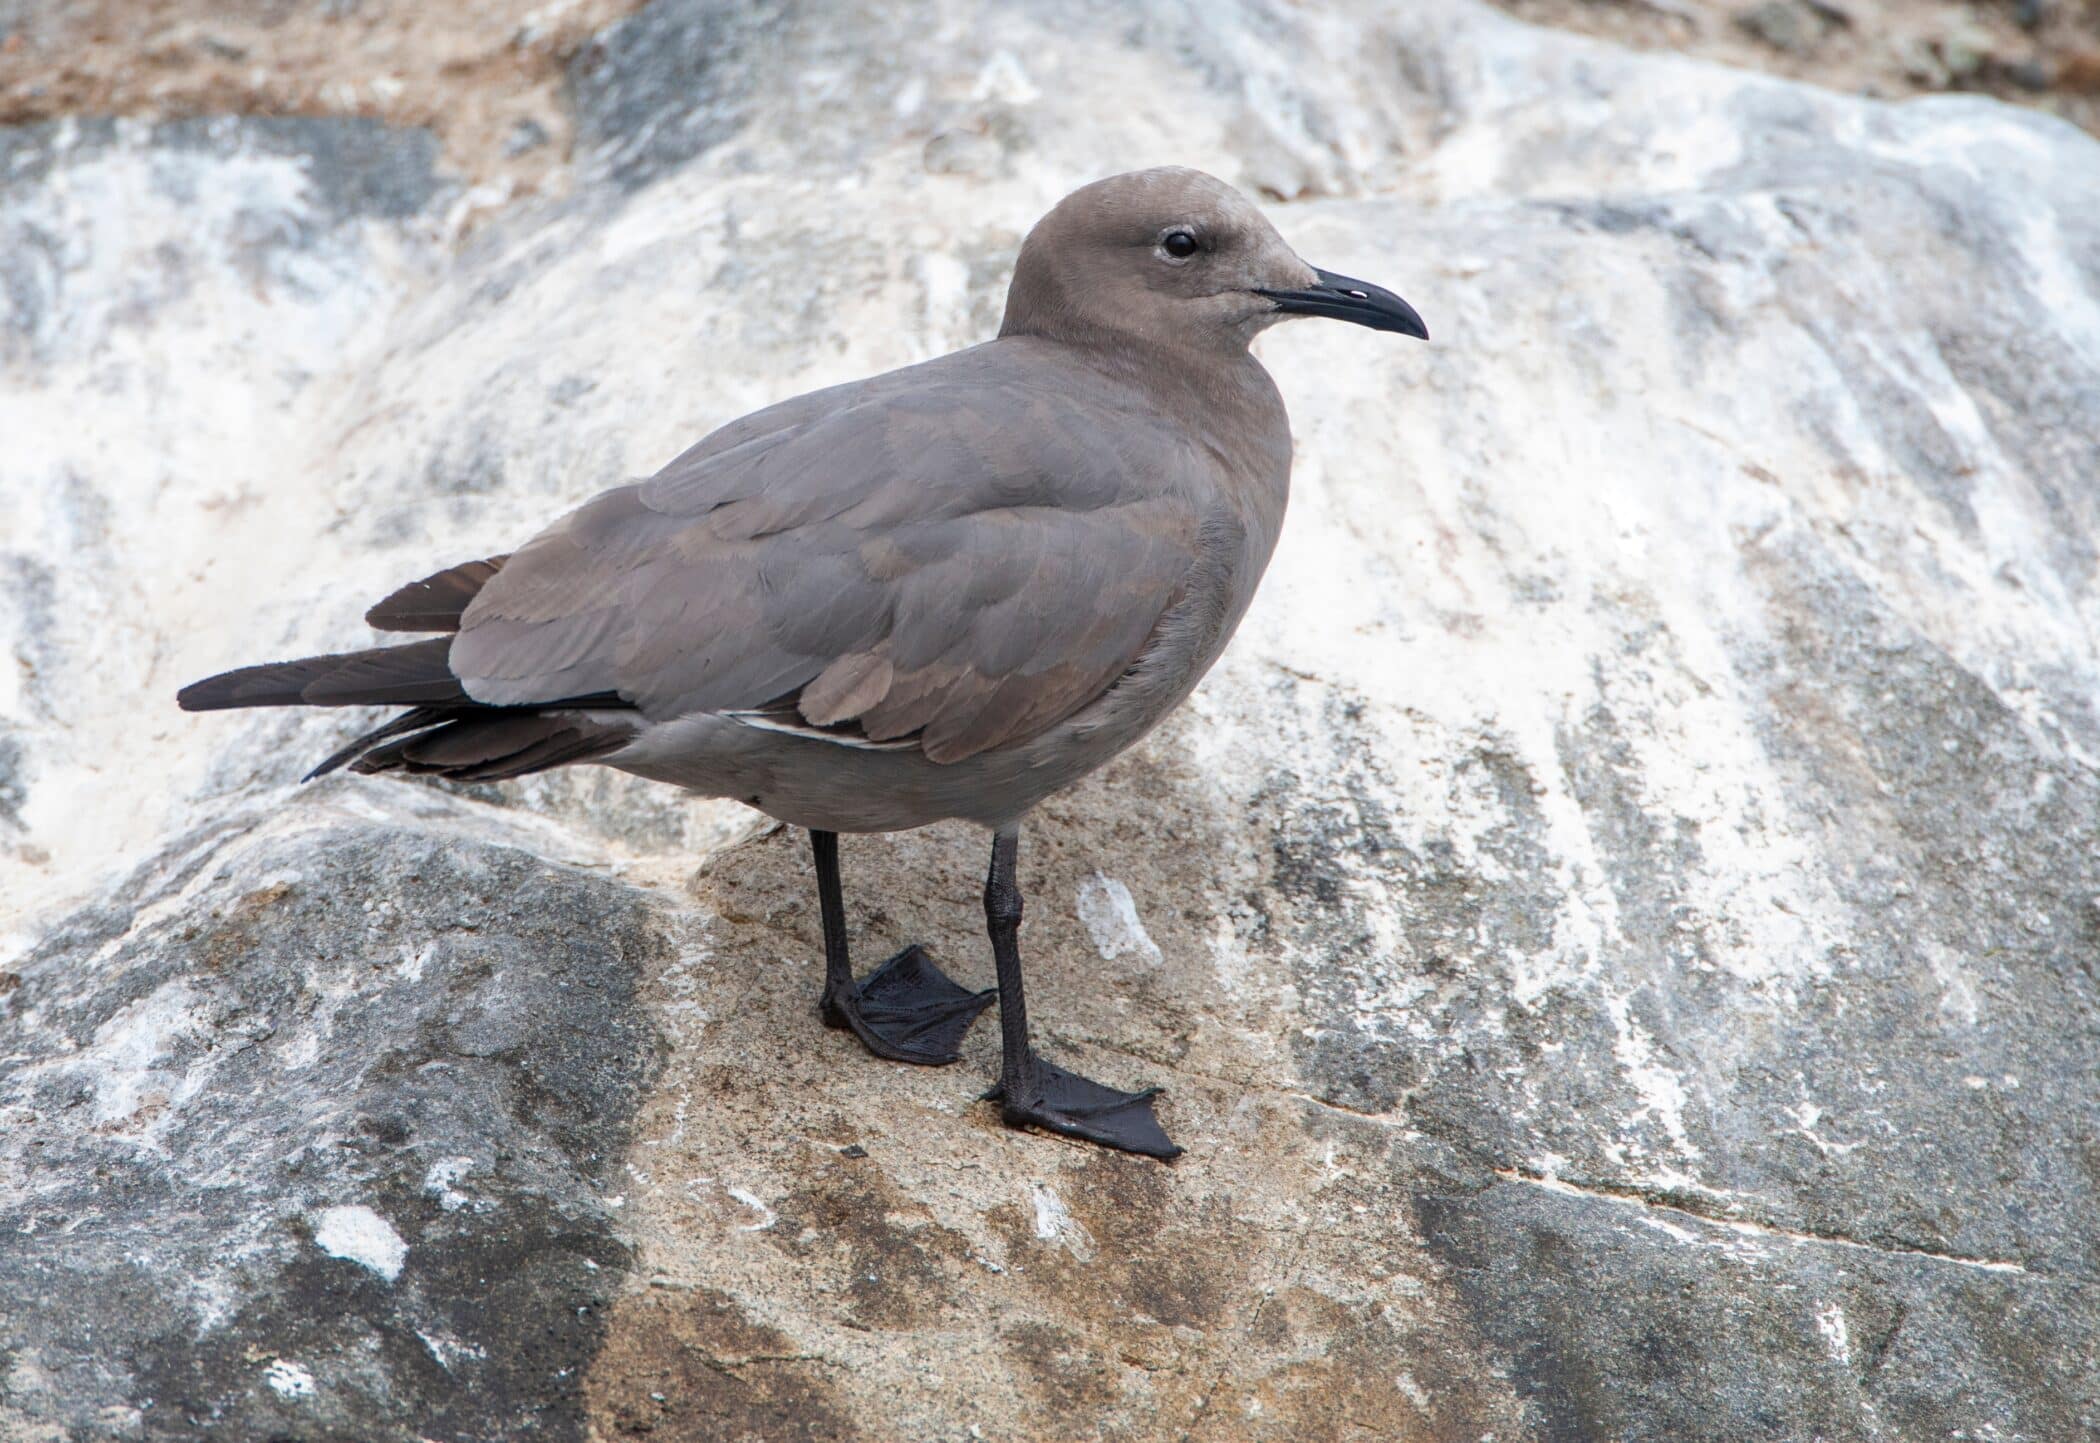 A grey gull perched on a rock